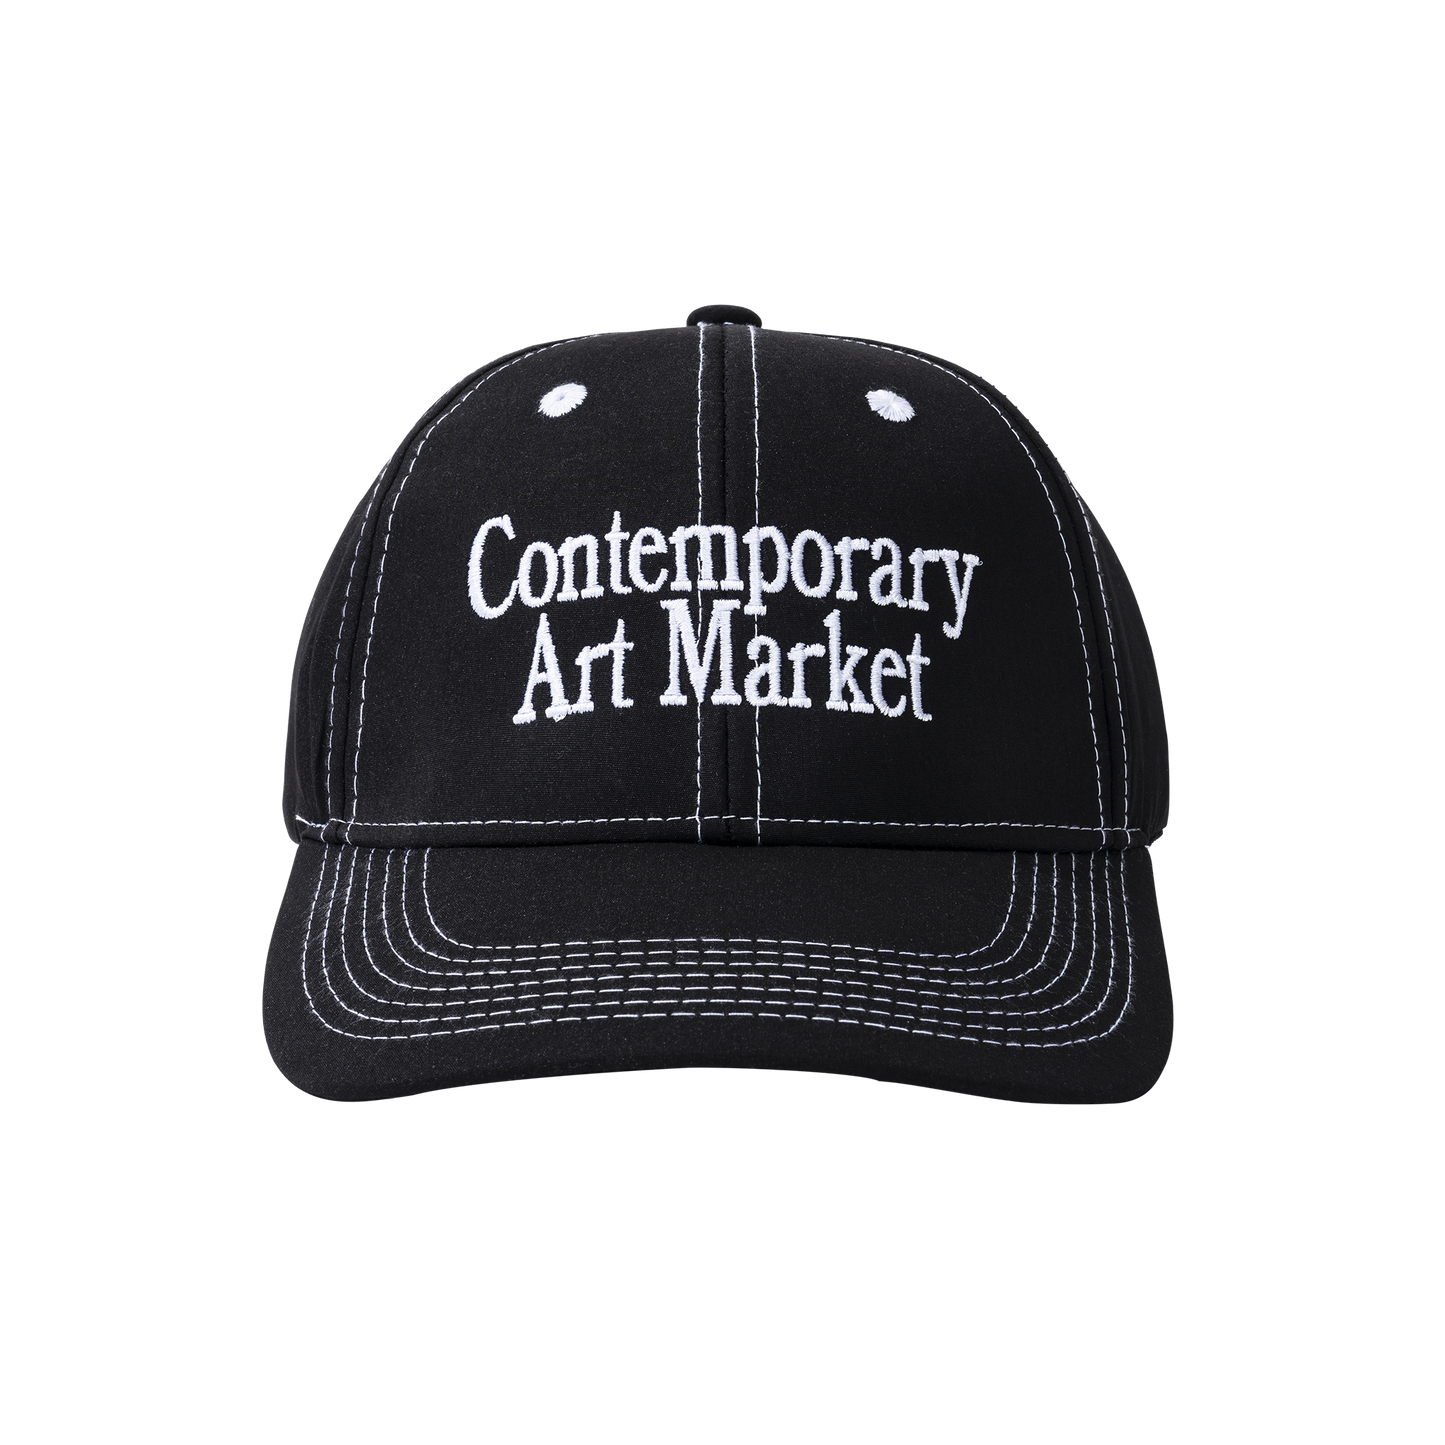 MARKET clothing brand C.A.M. CAP. Find more graphic tees, hats, beanies, hoodies at MarketStudios.com. Formally Chinatown Market. 